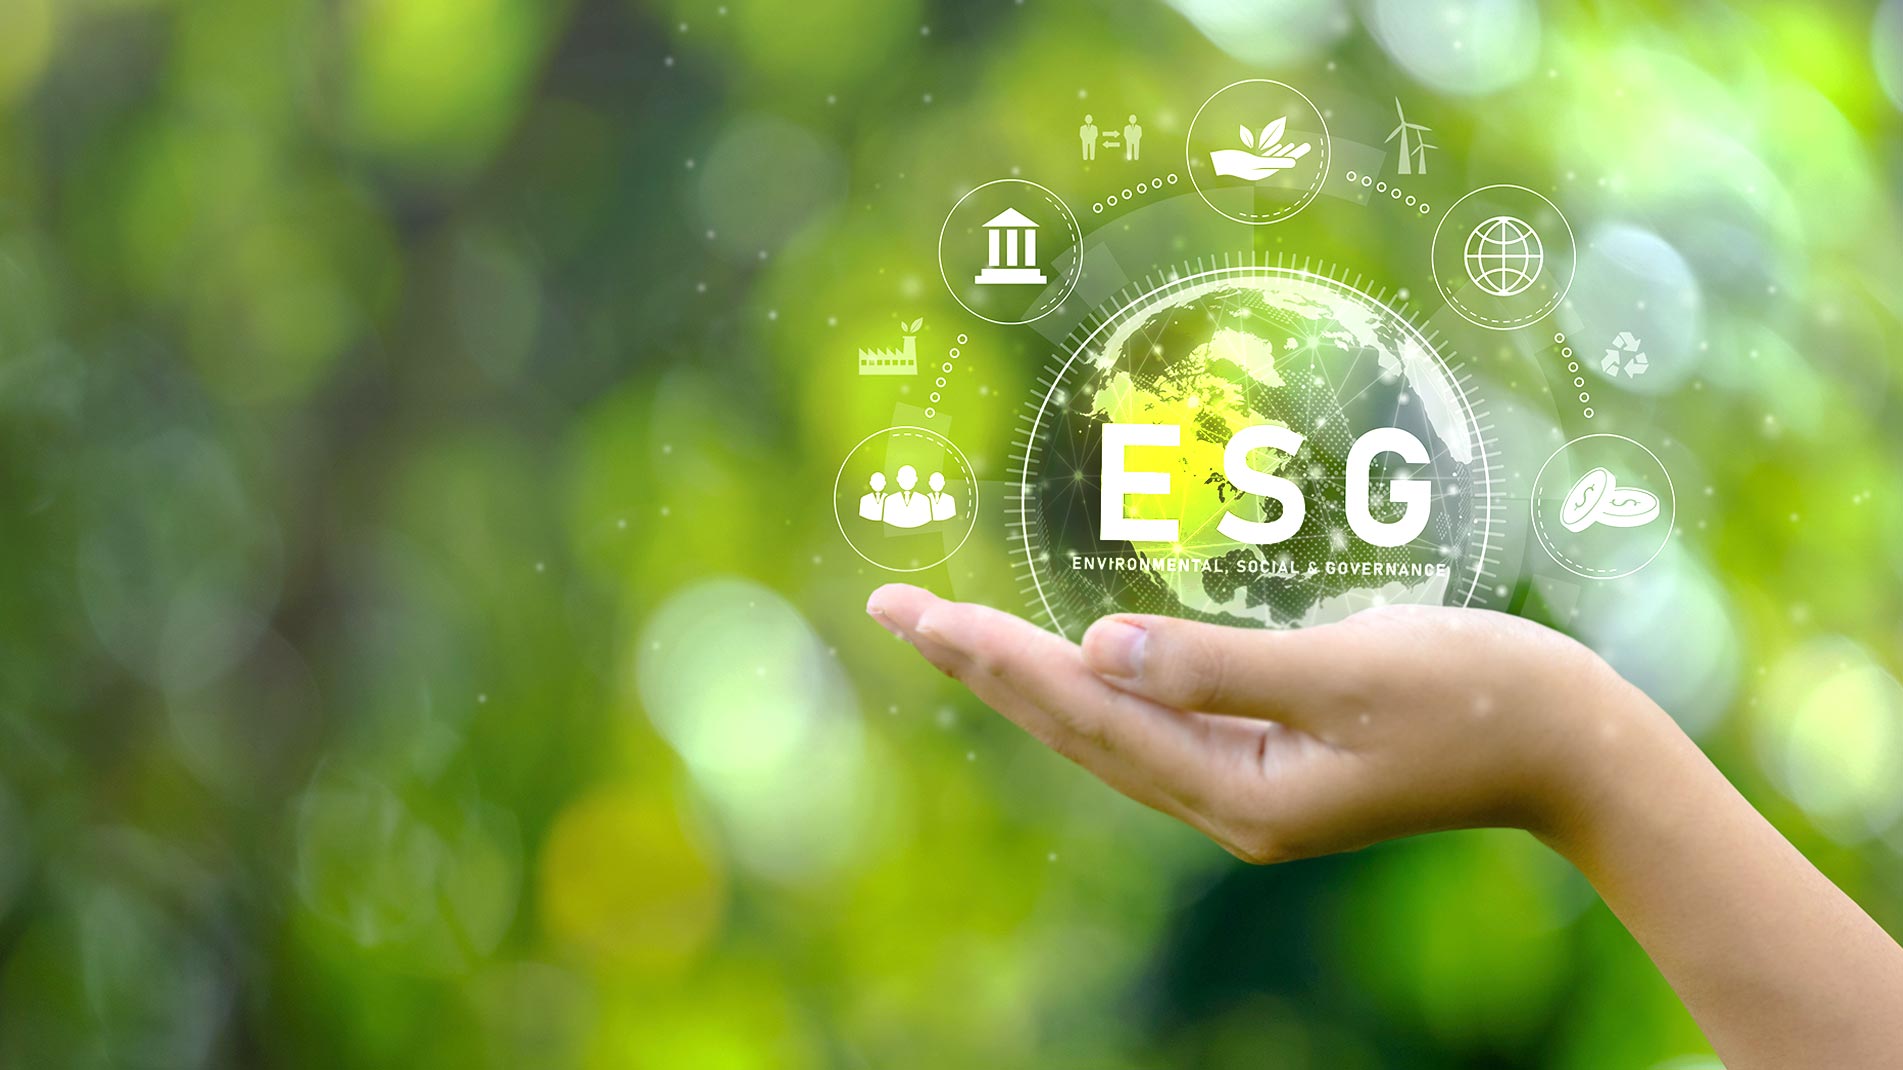 Greenhouse Gas How can these ESG report requirements be met to garner positive evaluations from various stakeholders and gain recognition from international brand manufacturers?